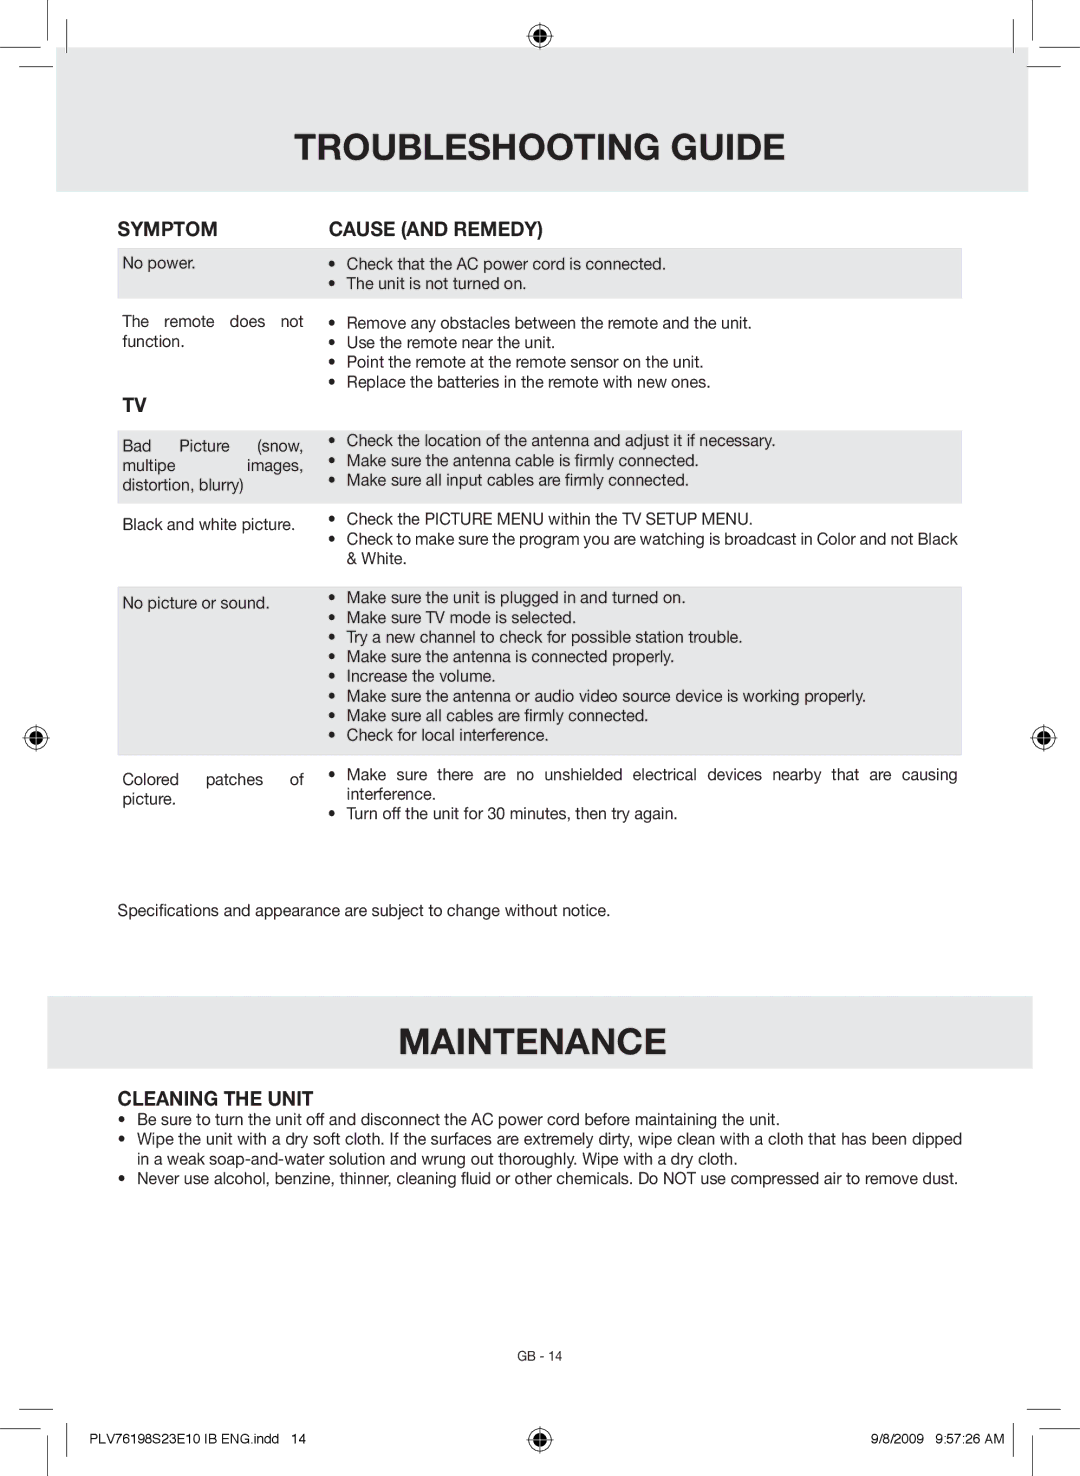 Venturer PLV76198E owner manual Troubleshooting Guide, Maintenance, Symptom, Cause and Remedy, Cleaning the unit 